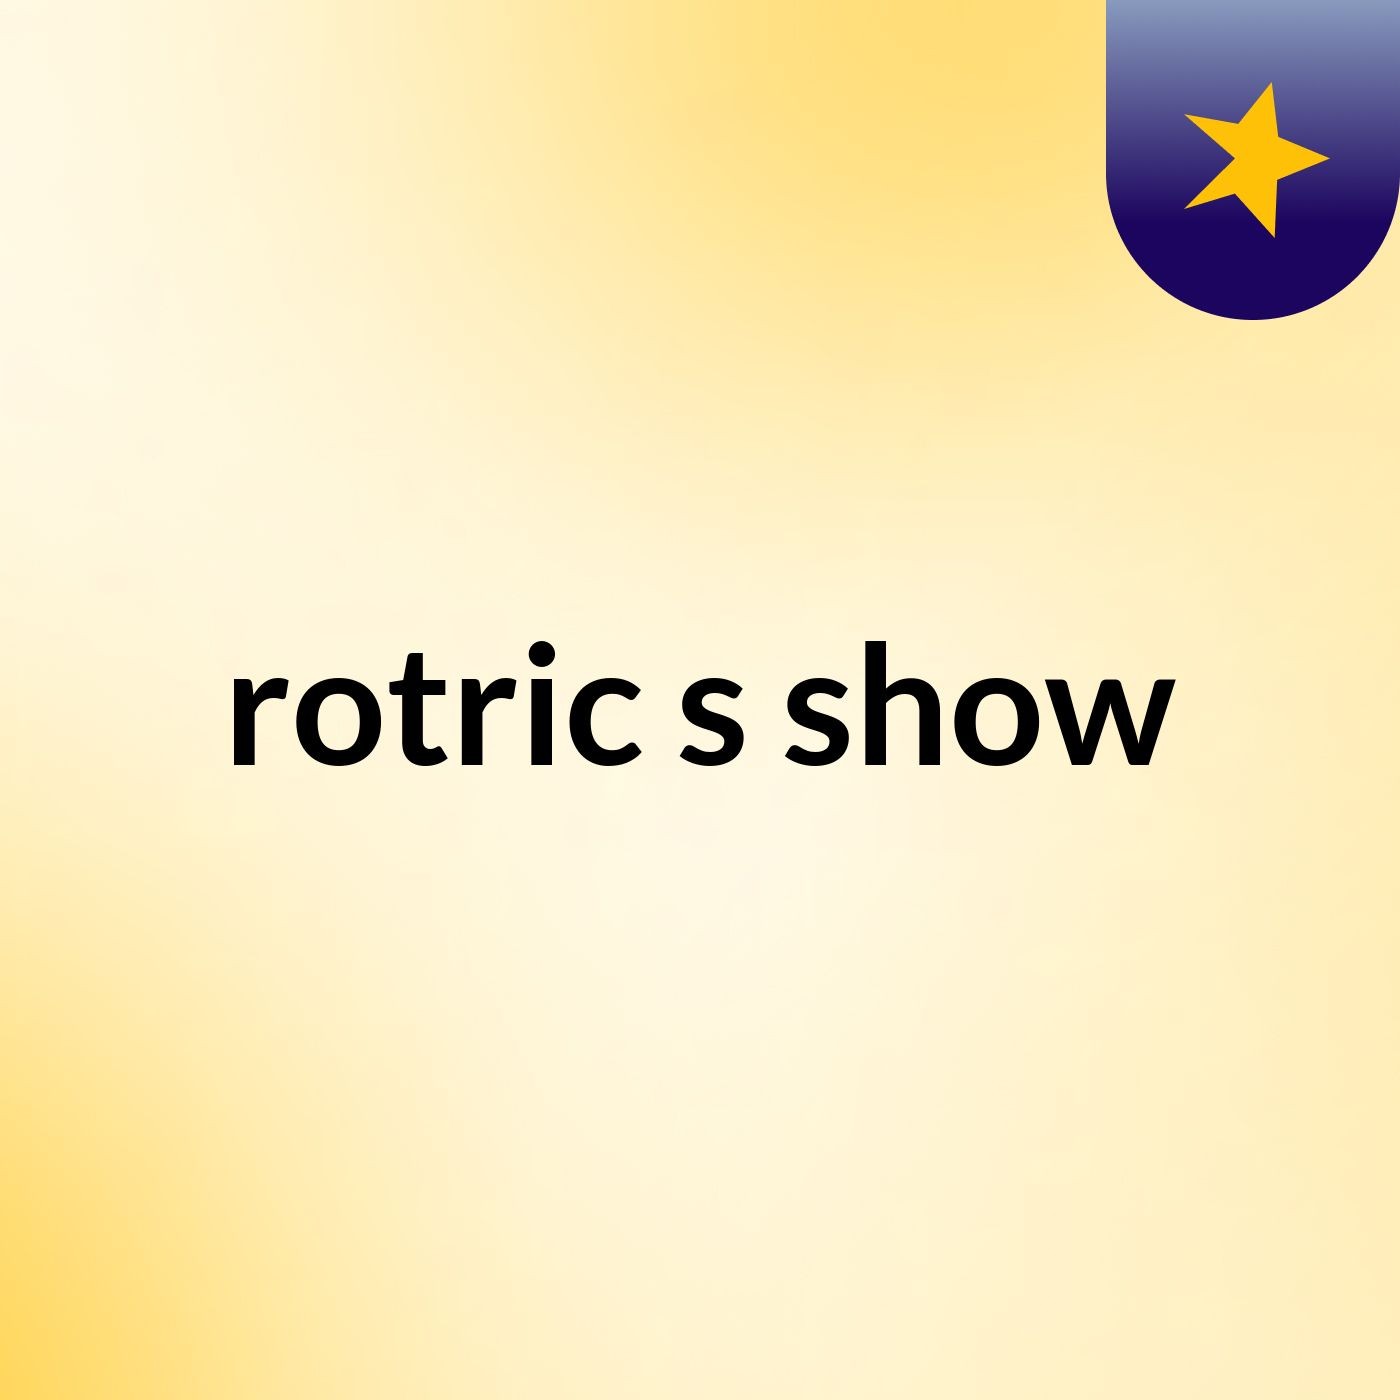 rotric's show